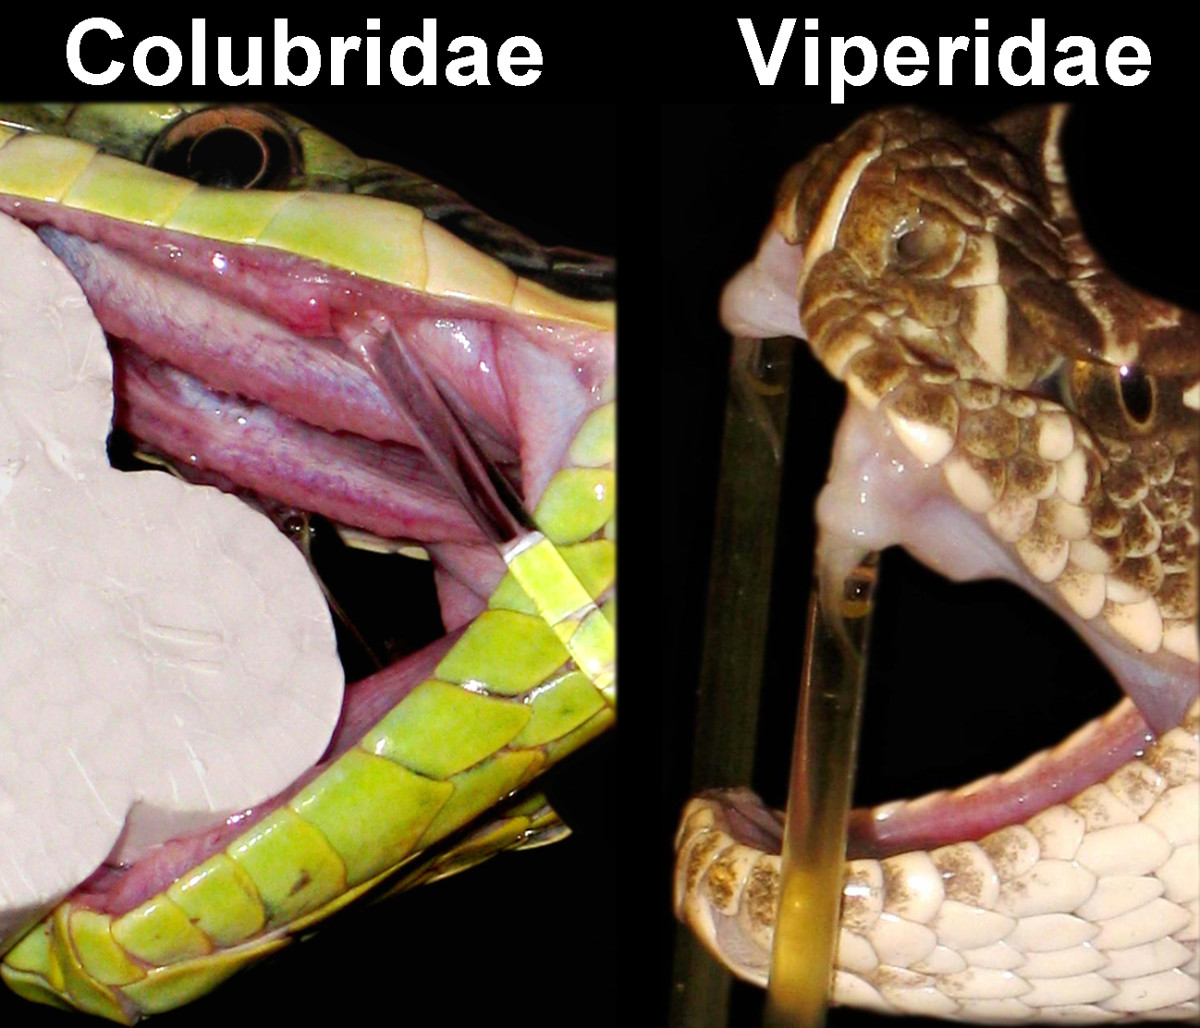 An Argentine Racer (Philodryas patagoniensis; family Colubridae) produces clear venom while a Prairie Rattlesnake (Crotalus viridis viridis; family Viperidae) produces yellow/gold venom, indicating the presence of LAAO in the viperid's venom.